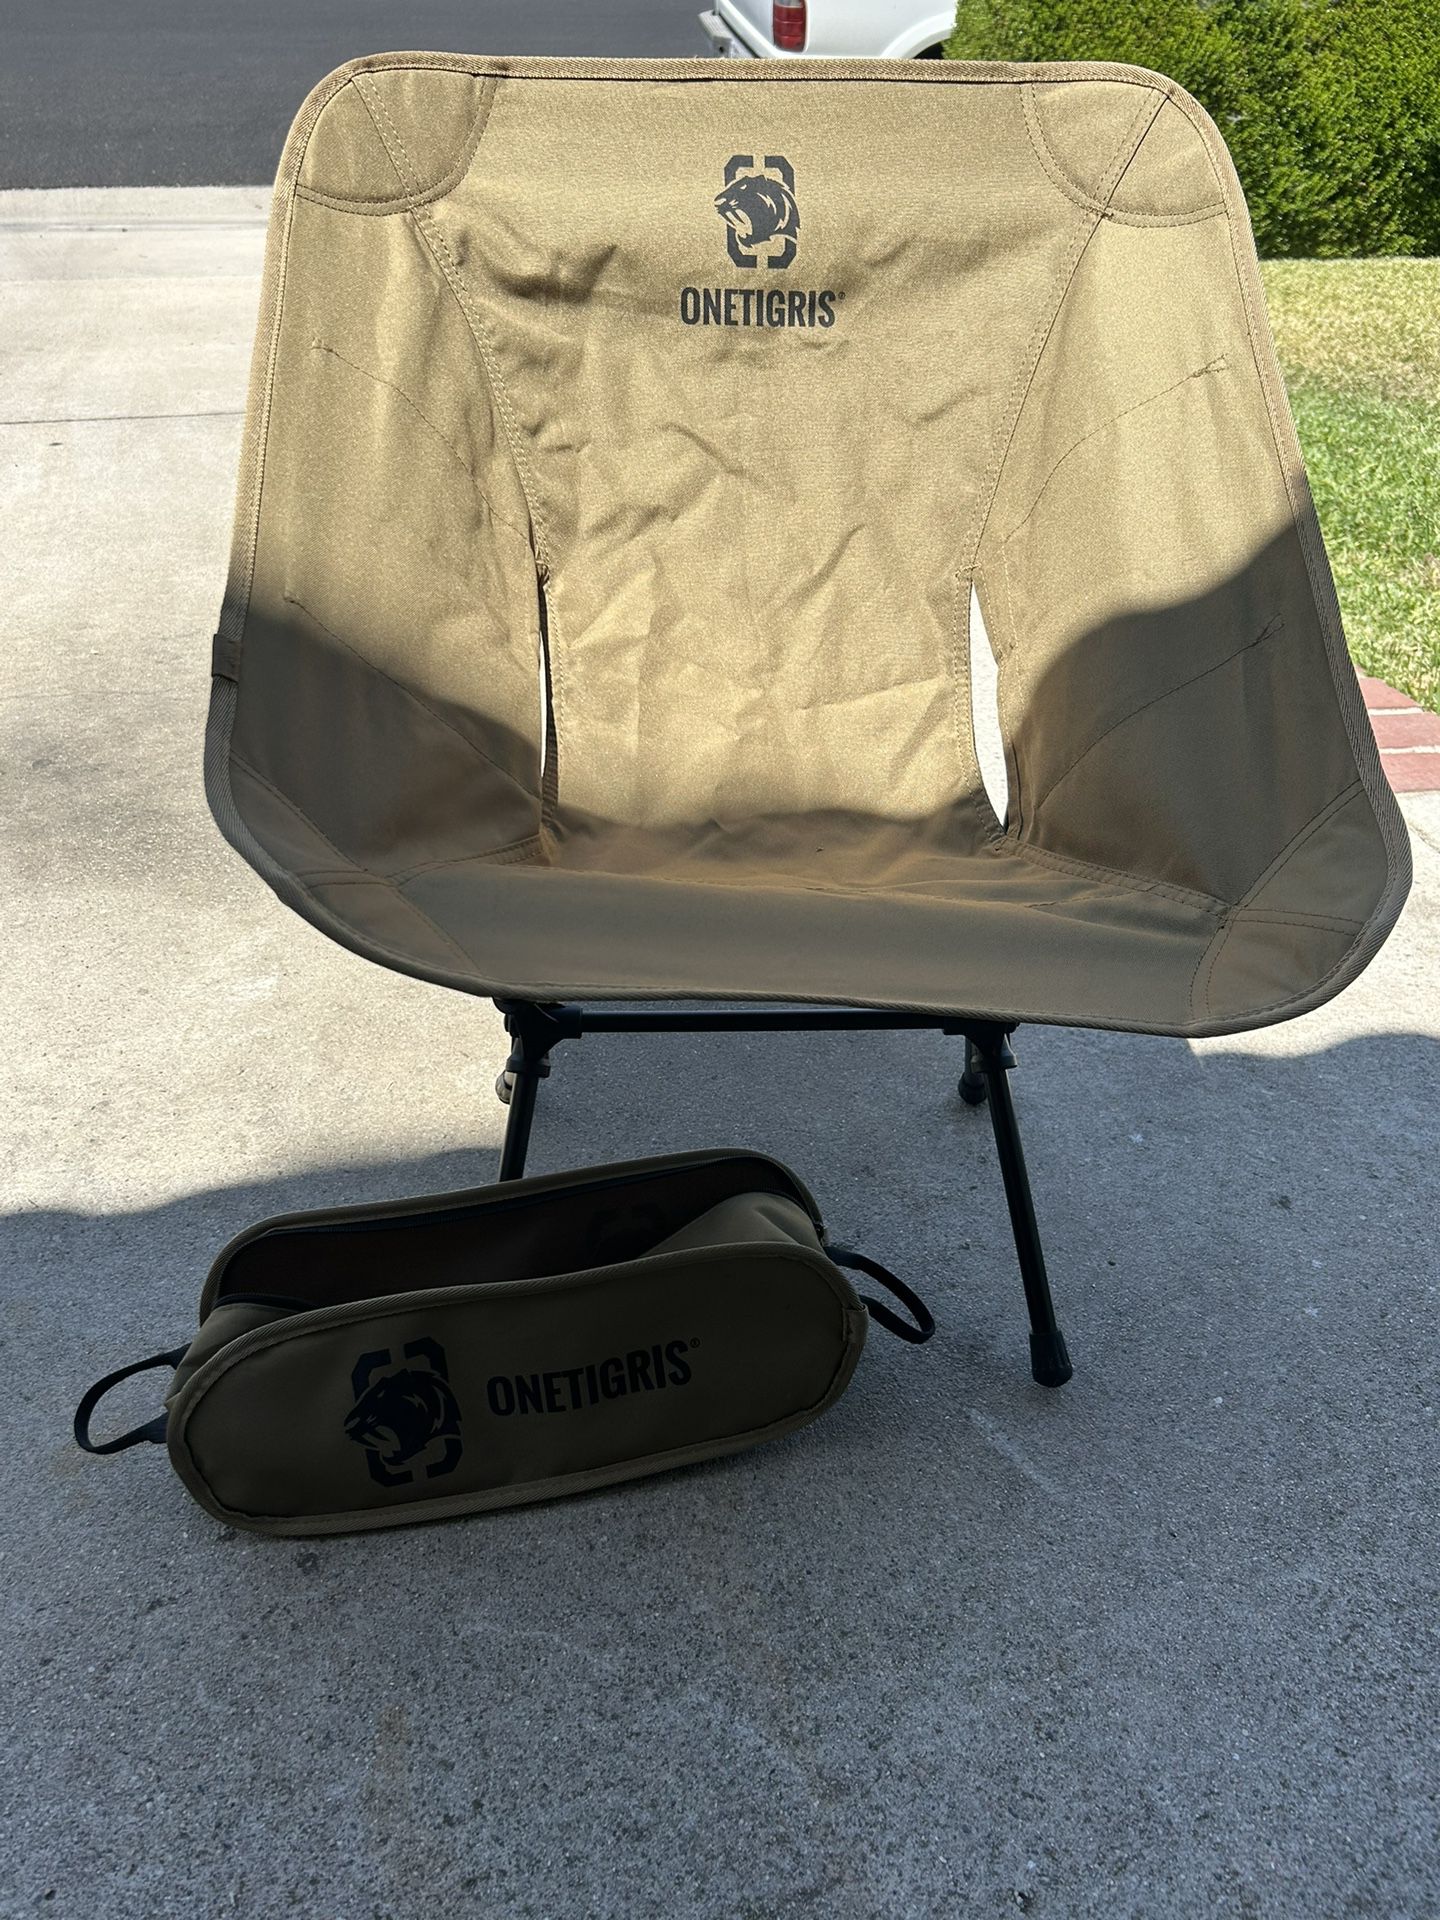 OneTigris Camping Chair Backpacking for Sale in Moreno Valley, CA - OfferUp